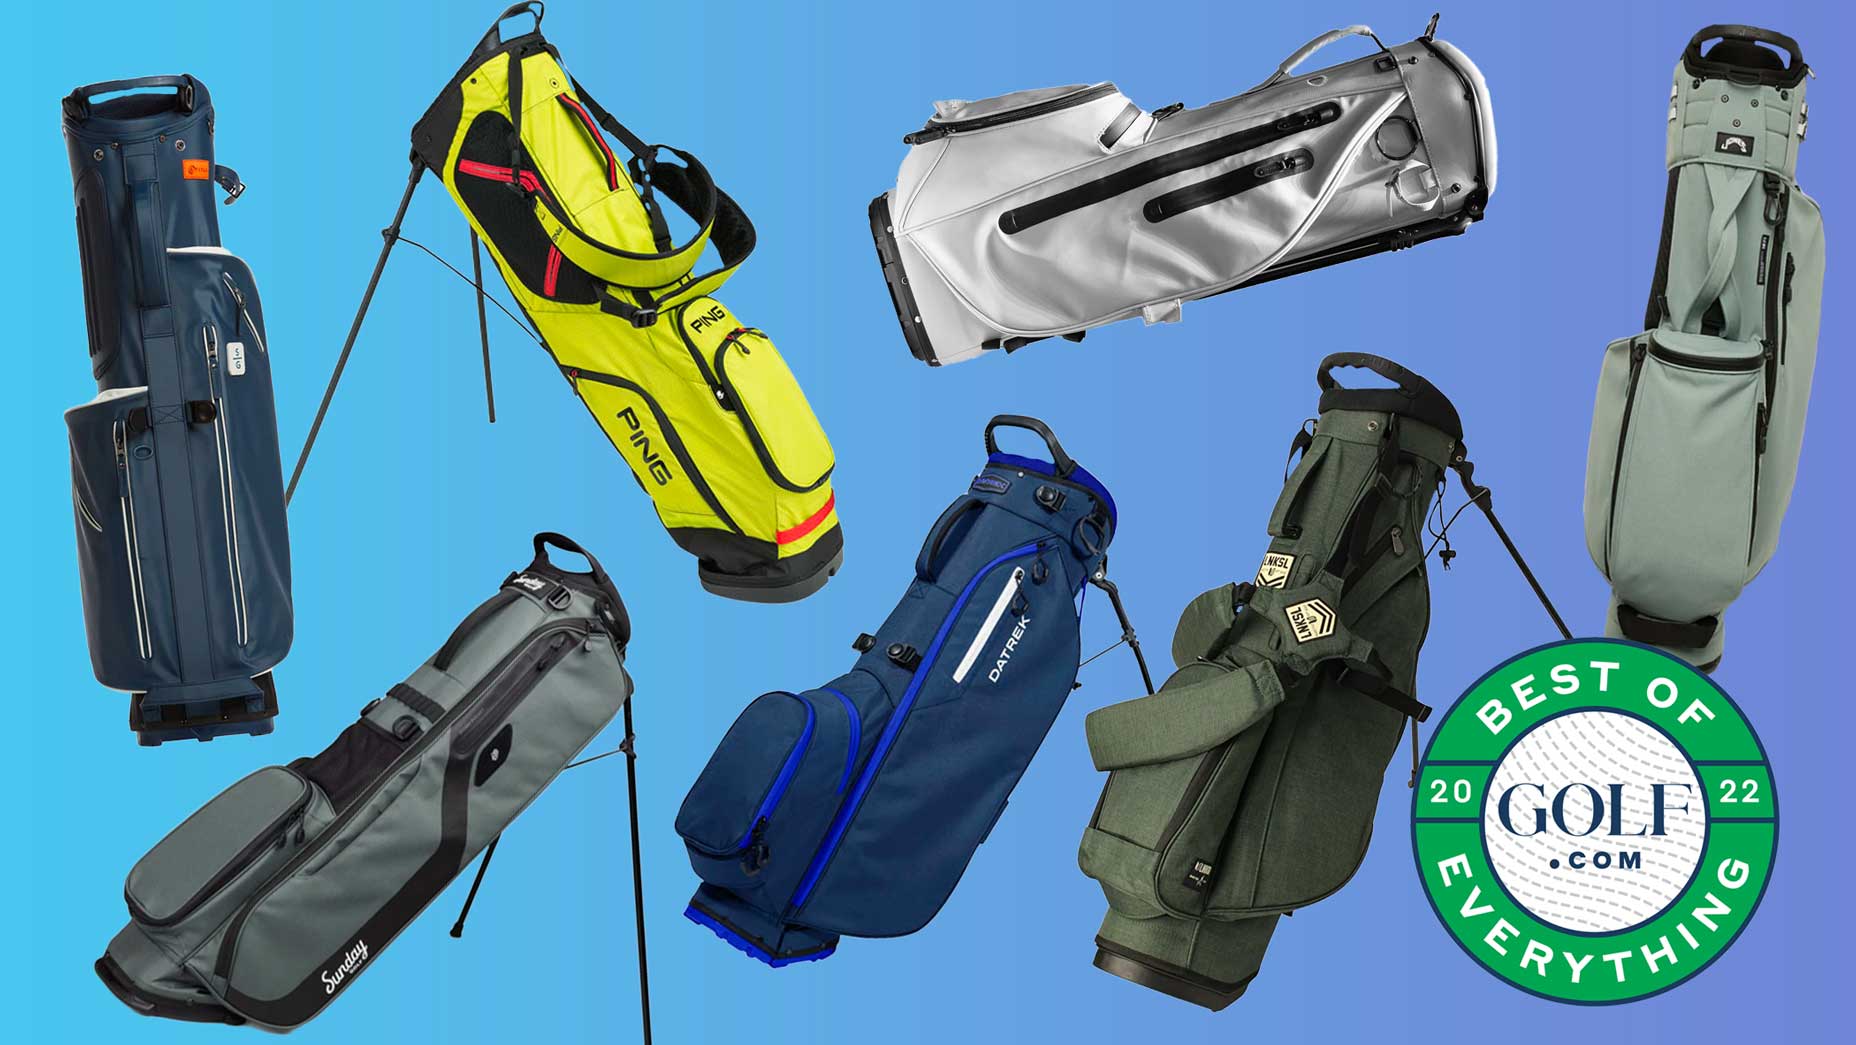 Top more than 75 best golf bags latest - esthdonghoadian